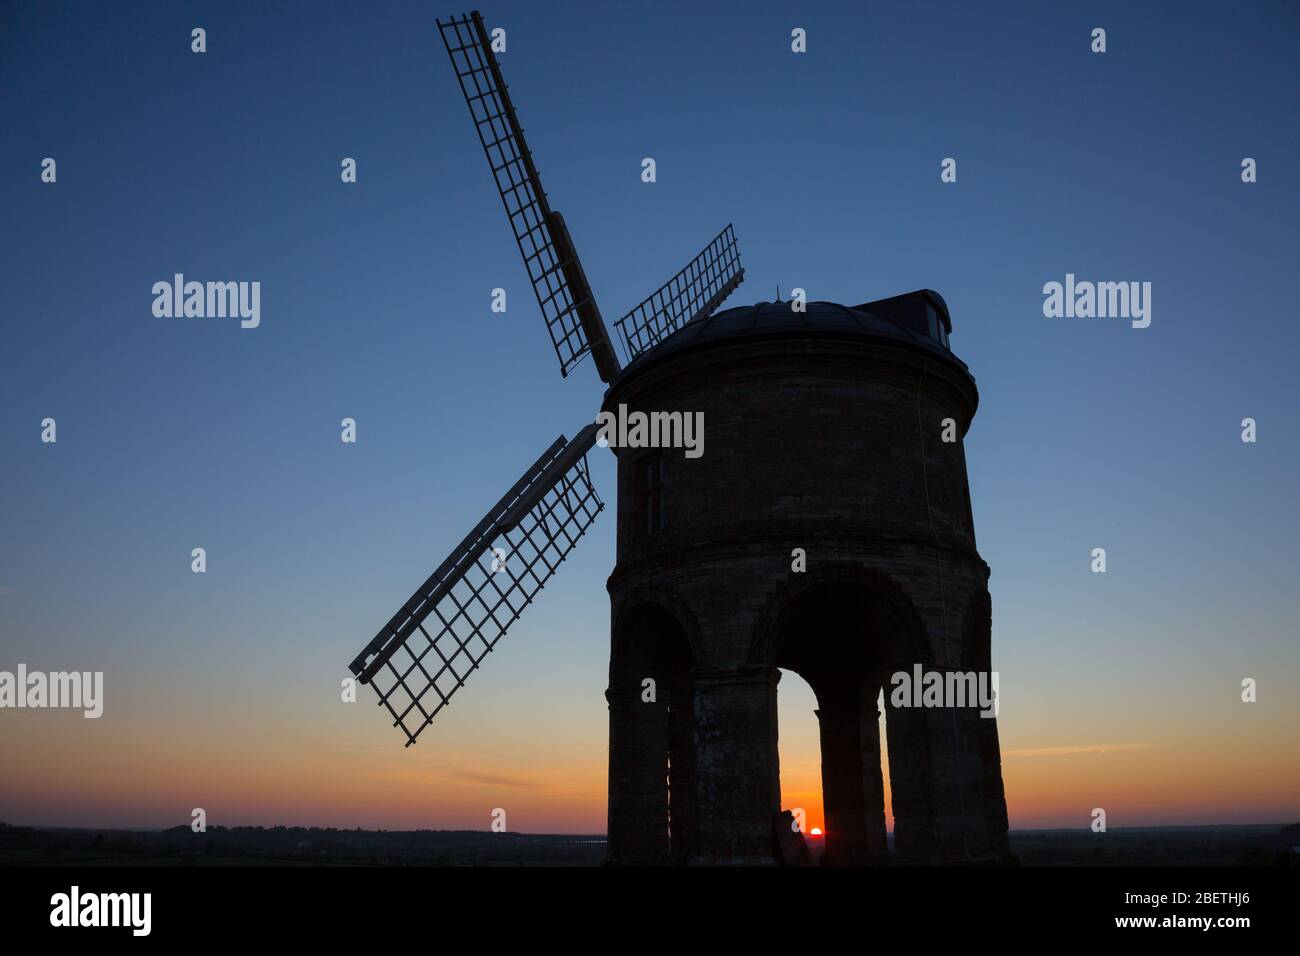 Chesterton, Warwickshire, UK. 15th Apr, 2020. After a beautifully clear day the sun sets behind Chesterton windmill, a Grade 1 listed 17th century cylindric stone tower windmill, near Leamington Spa. Credit: Peter Lopeman/Alamy Live News Stock Photo